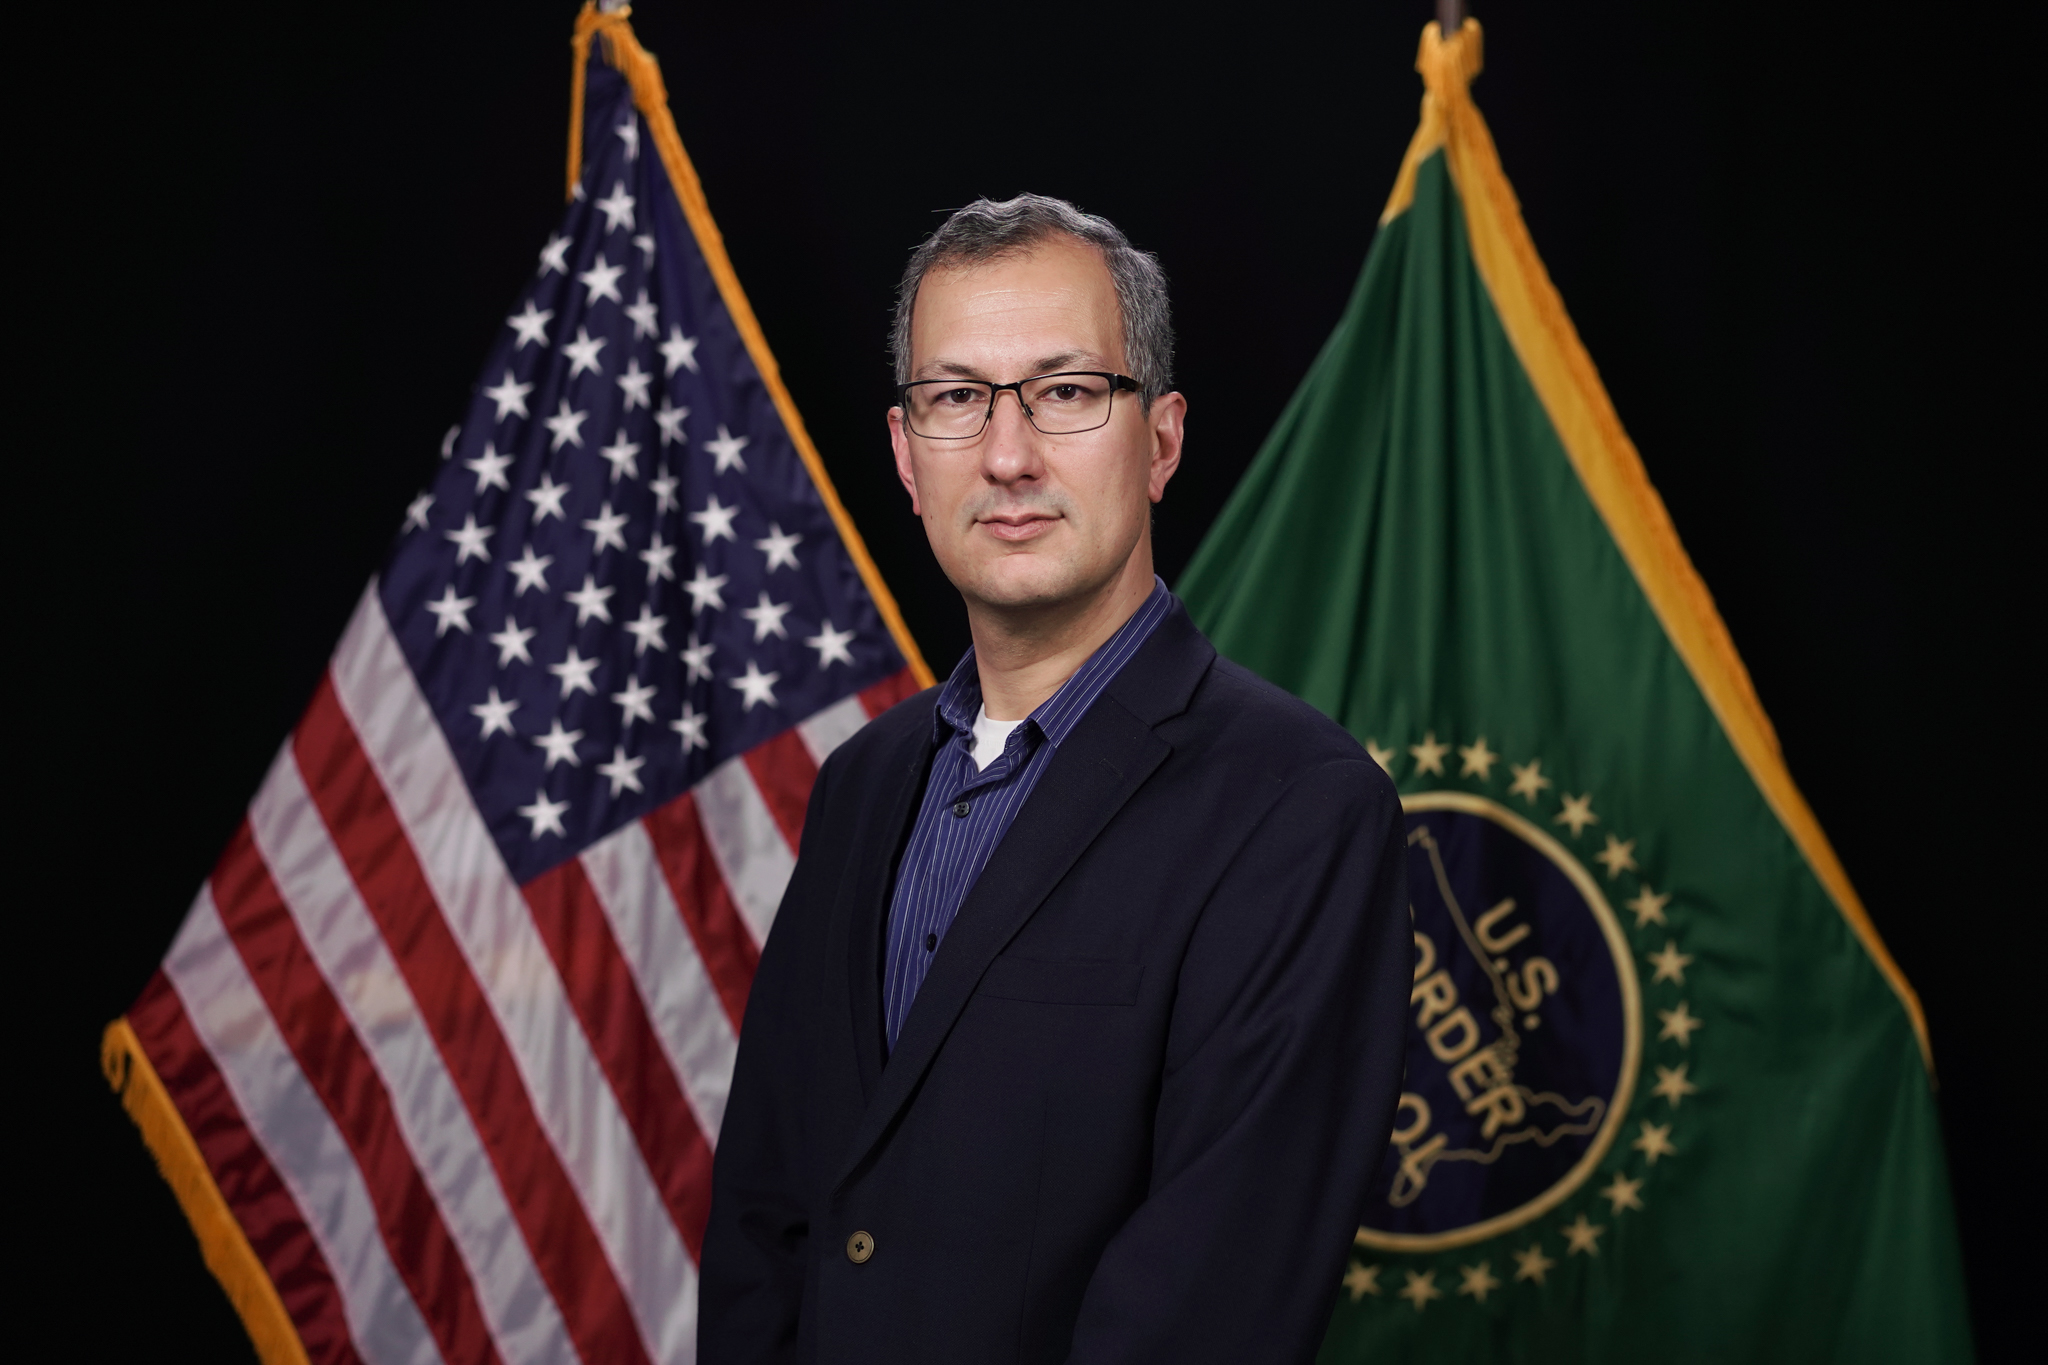 In 2019, Paul Merani was awarded the U.S. Border Patrol’s Meritorious Achievement Award for his work developing a rescue system.